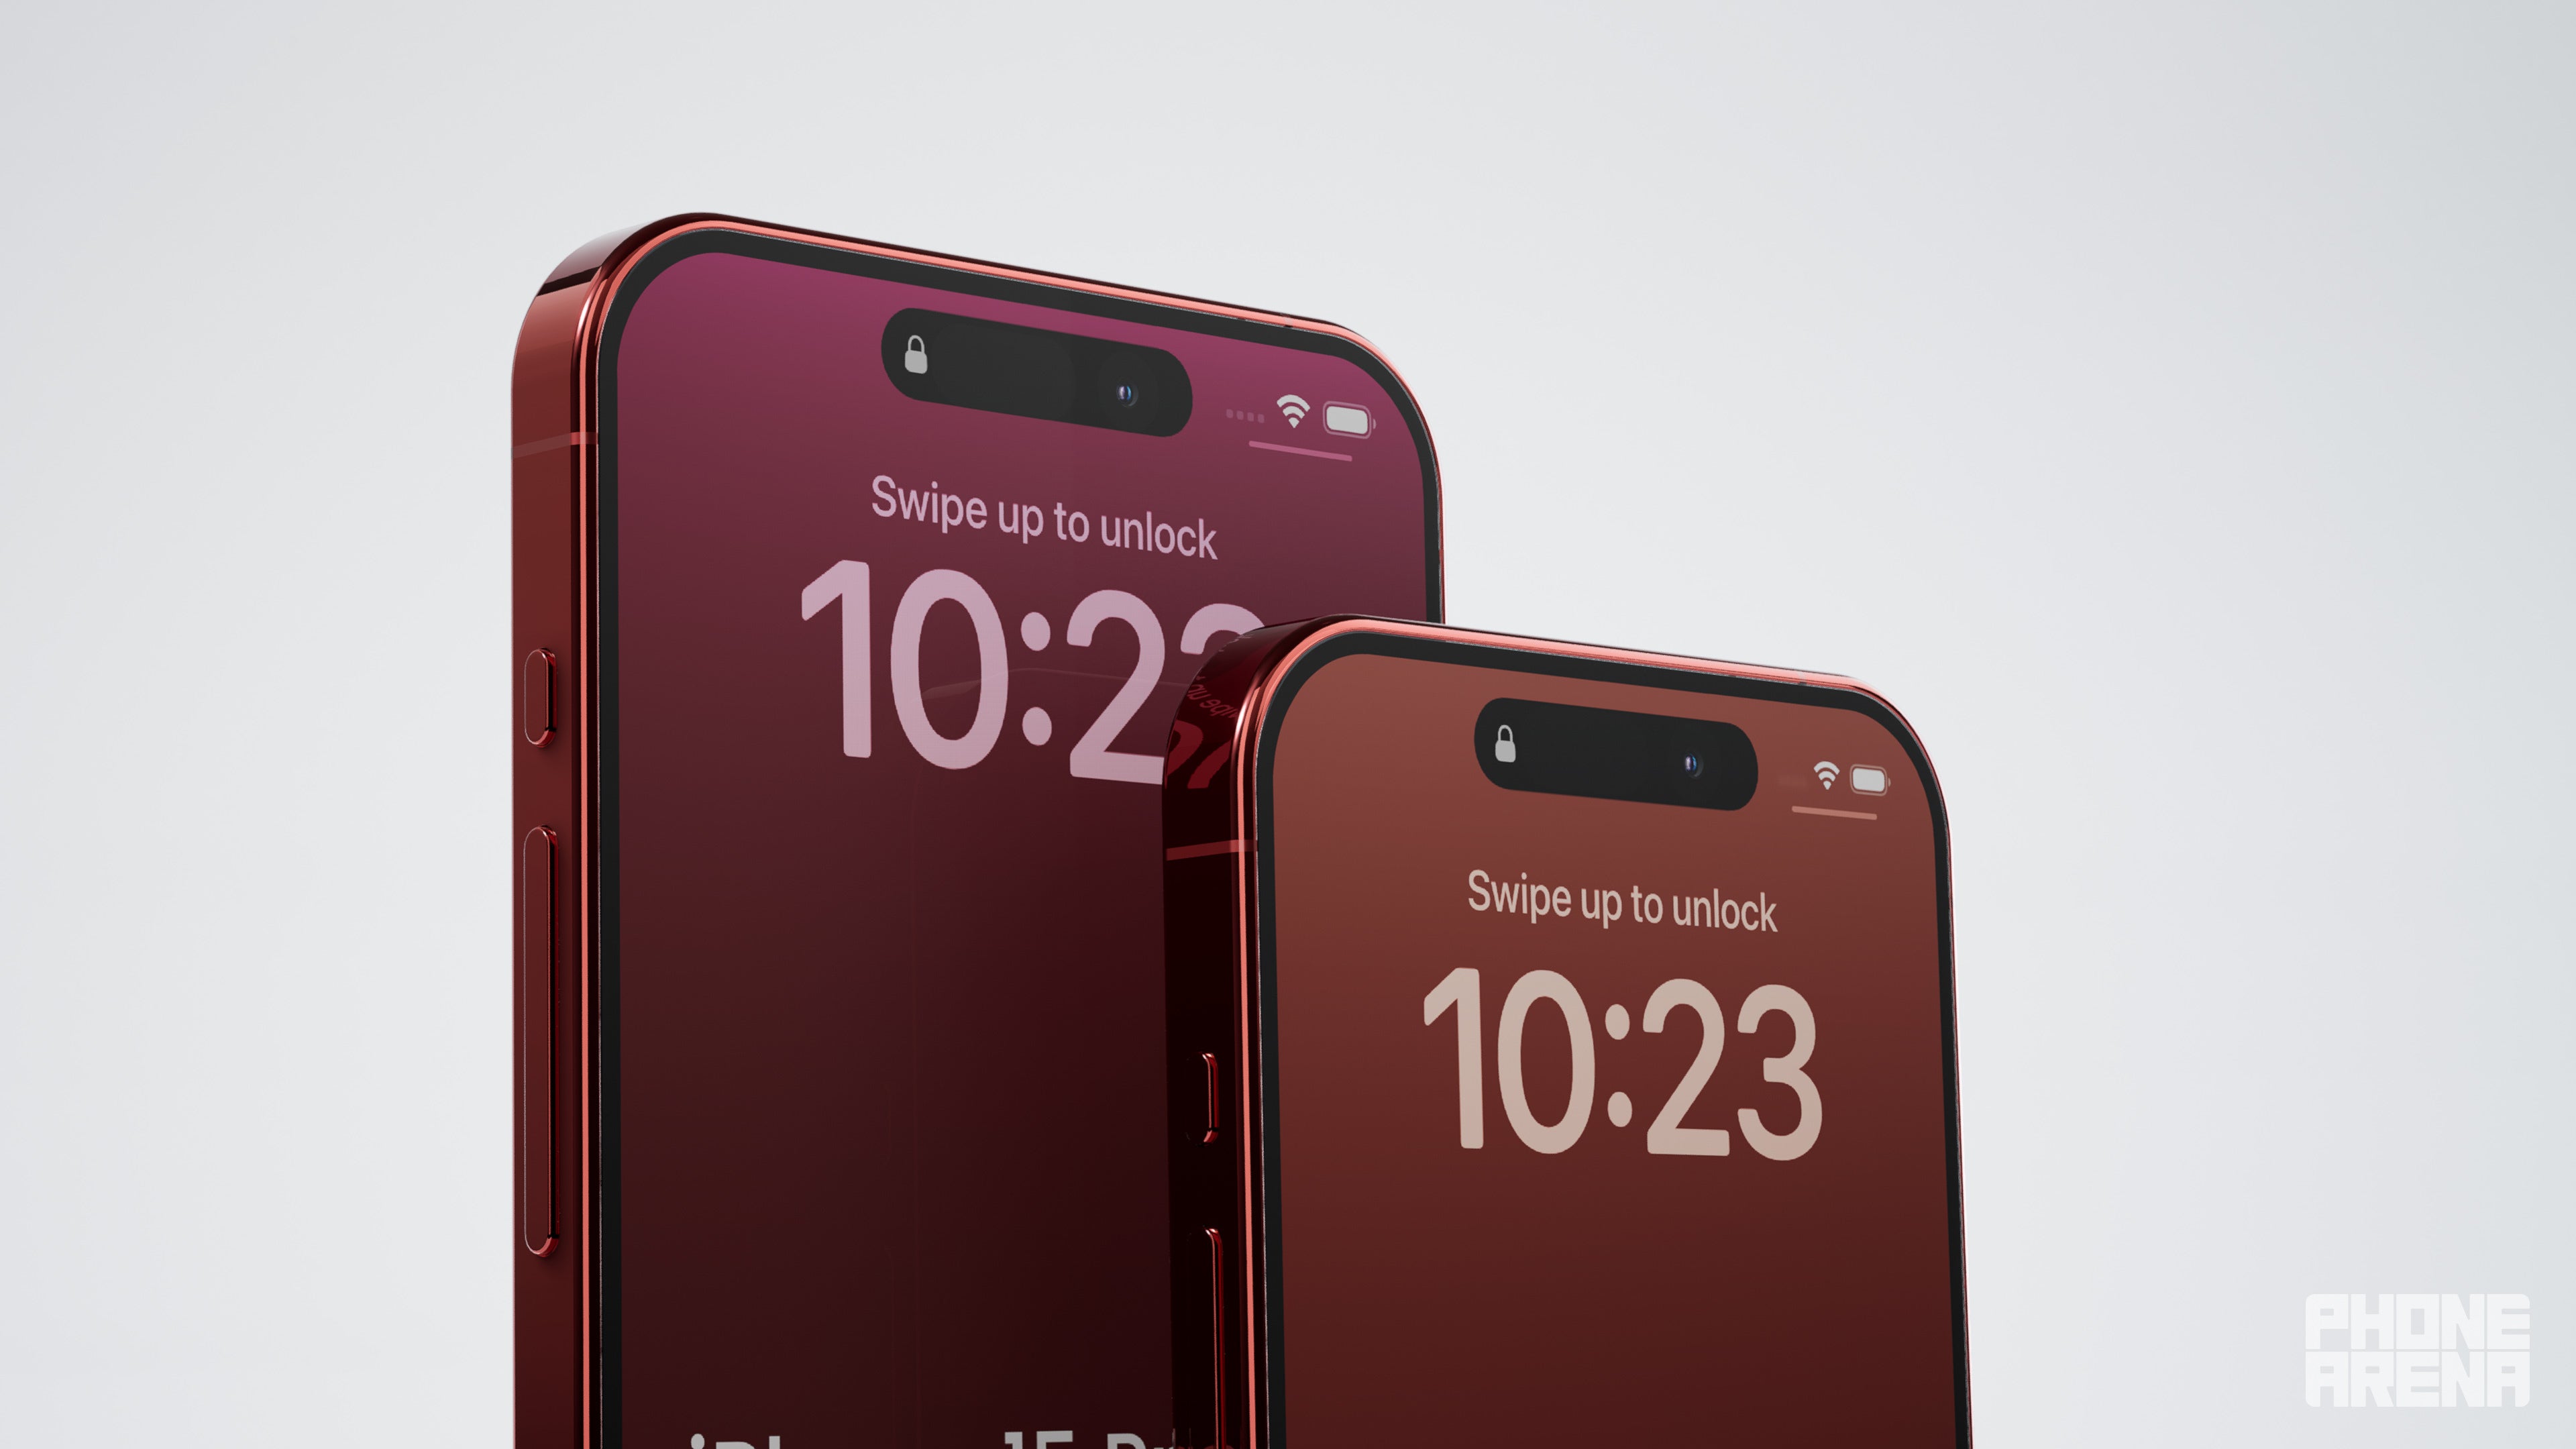 The iPhone 15 Pro and 15 Pro Max with the thinnest-ever bezels on a phone. - Here are all the expected iPhone 15 design changes visualized